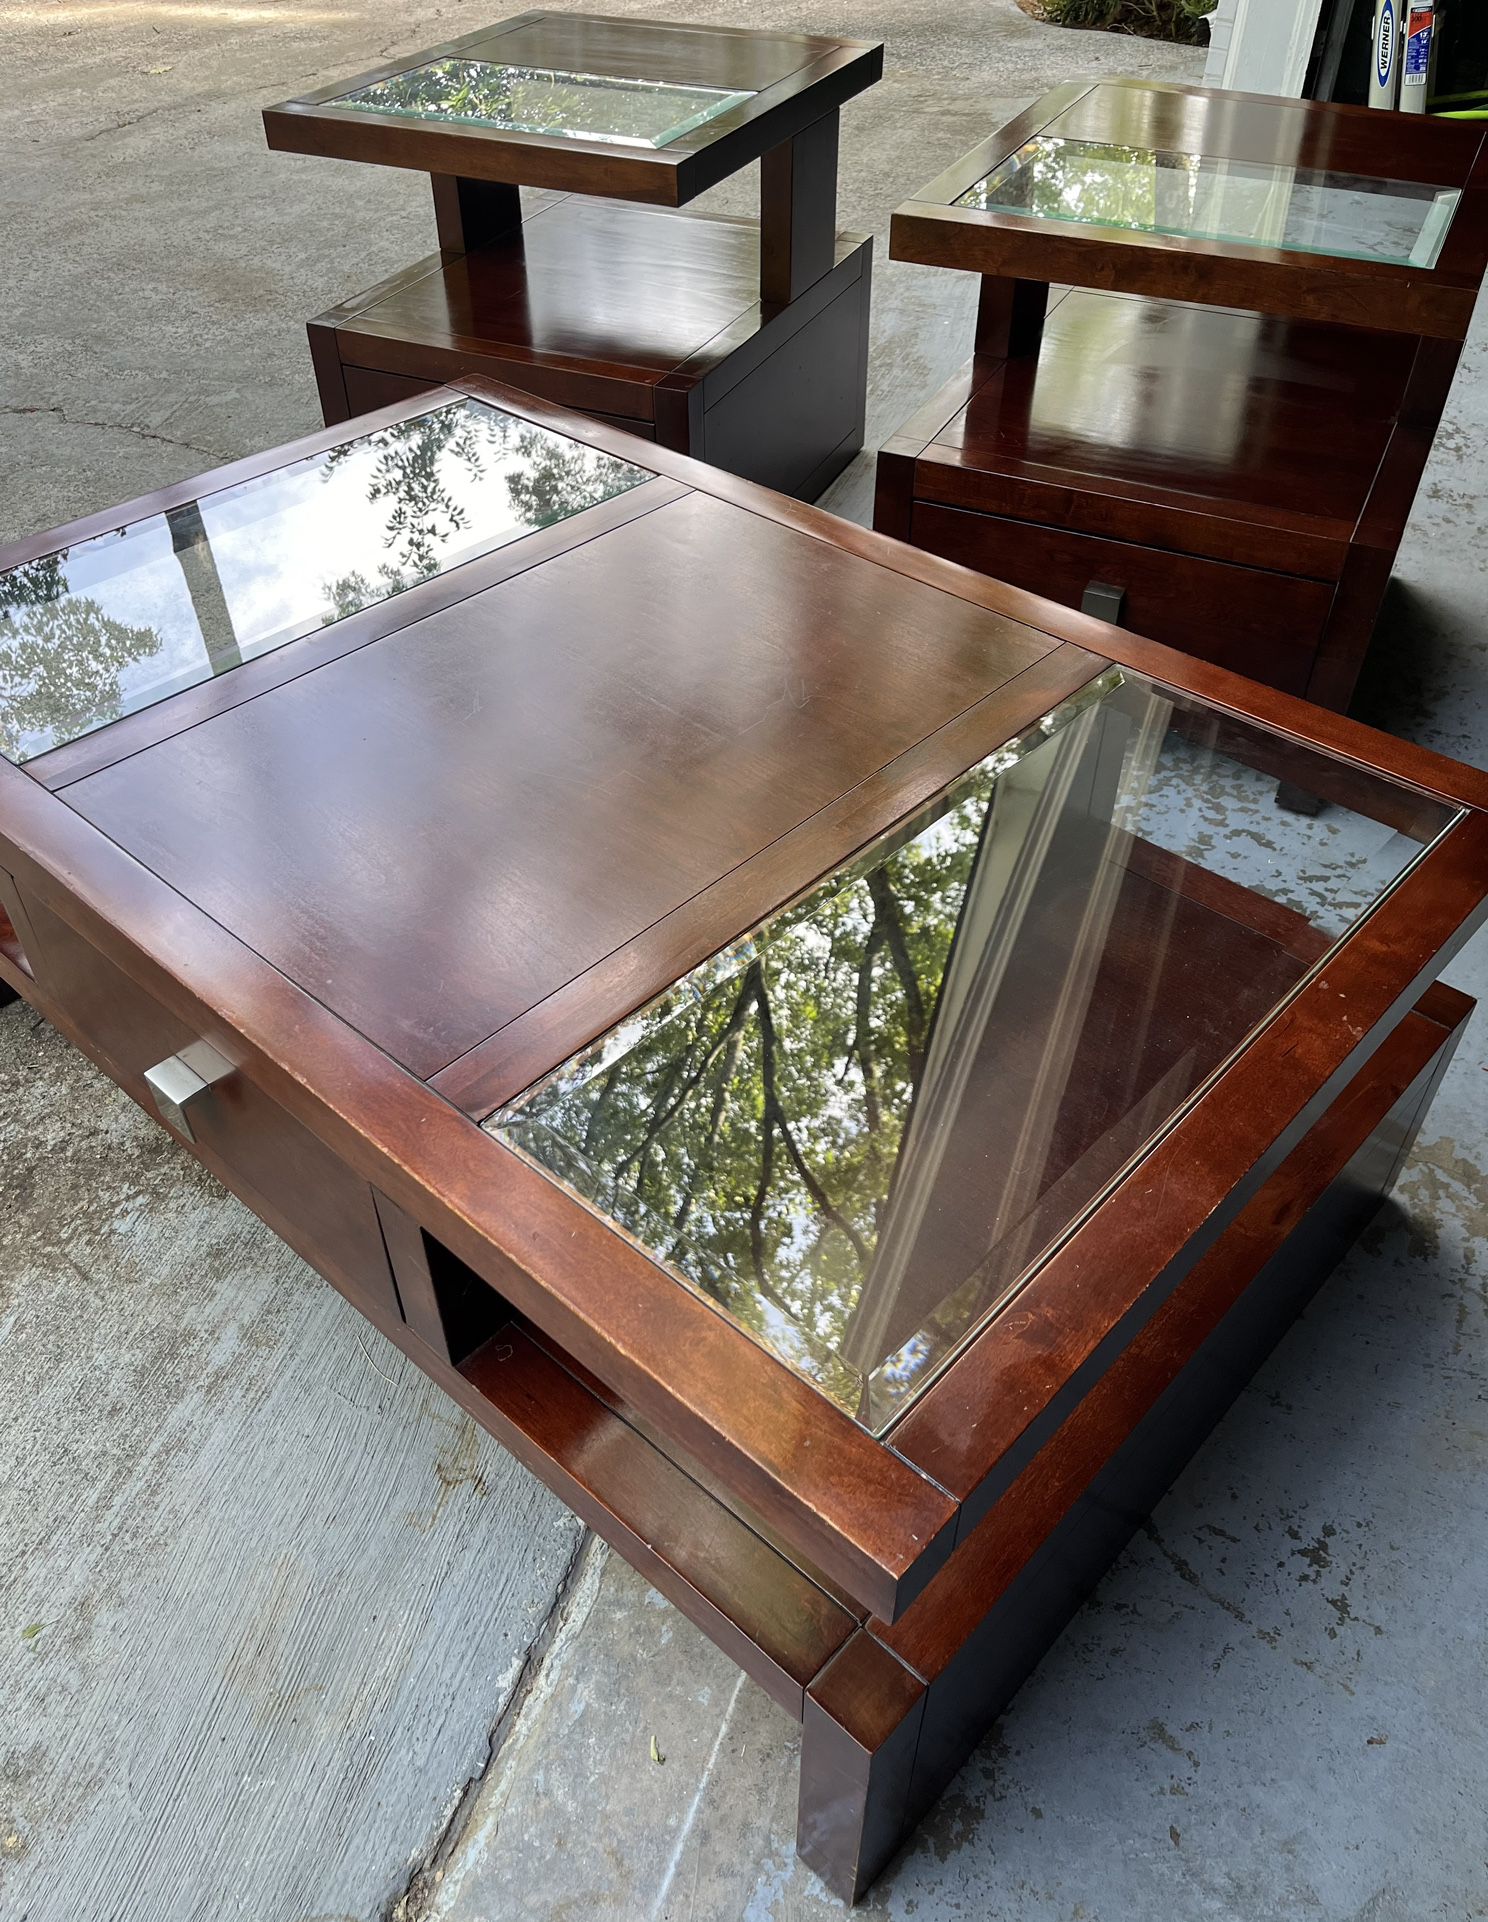 SET OF 3 WOOD & GLASS COCKTAIL & END TABLES